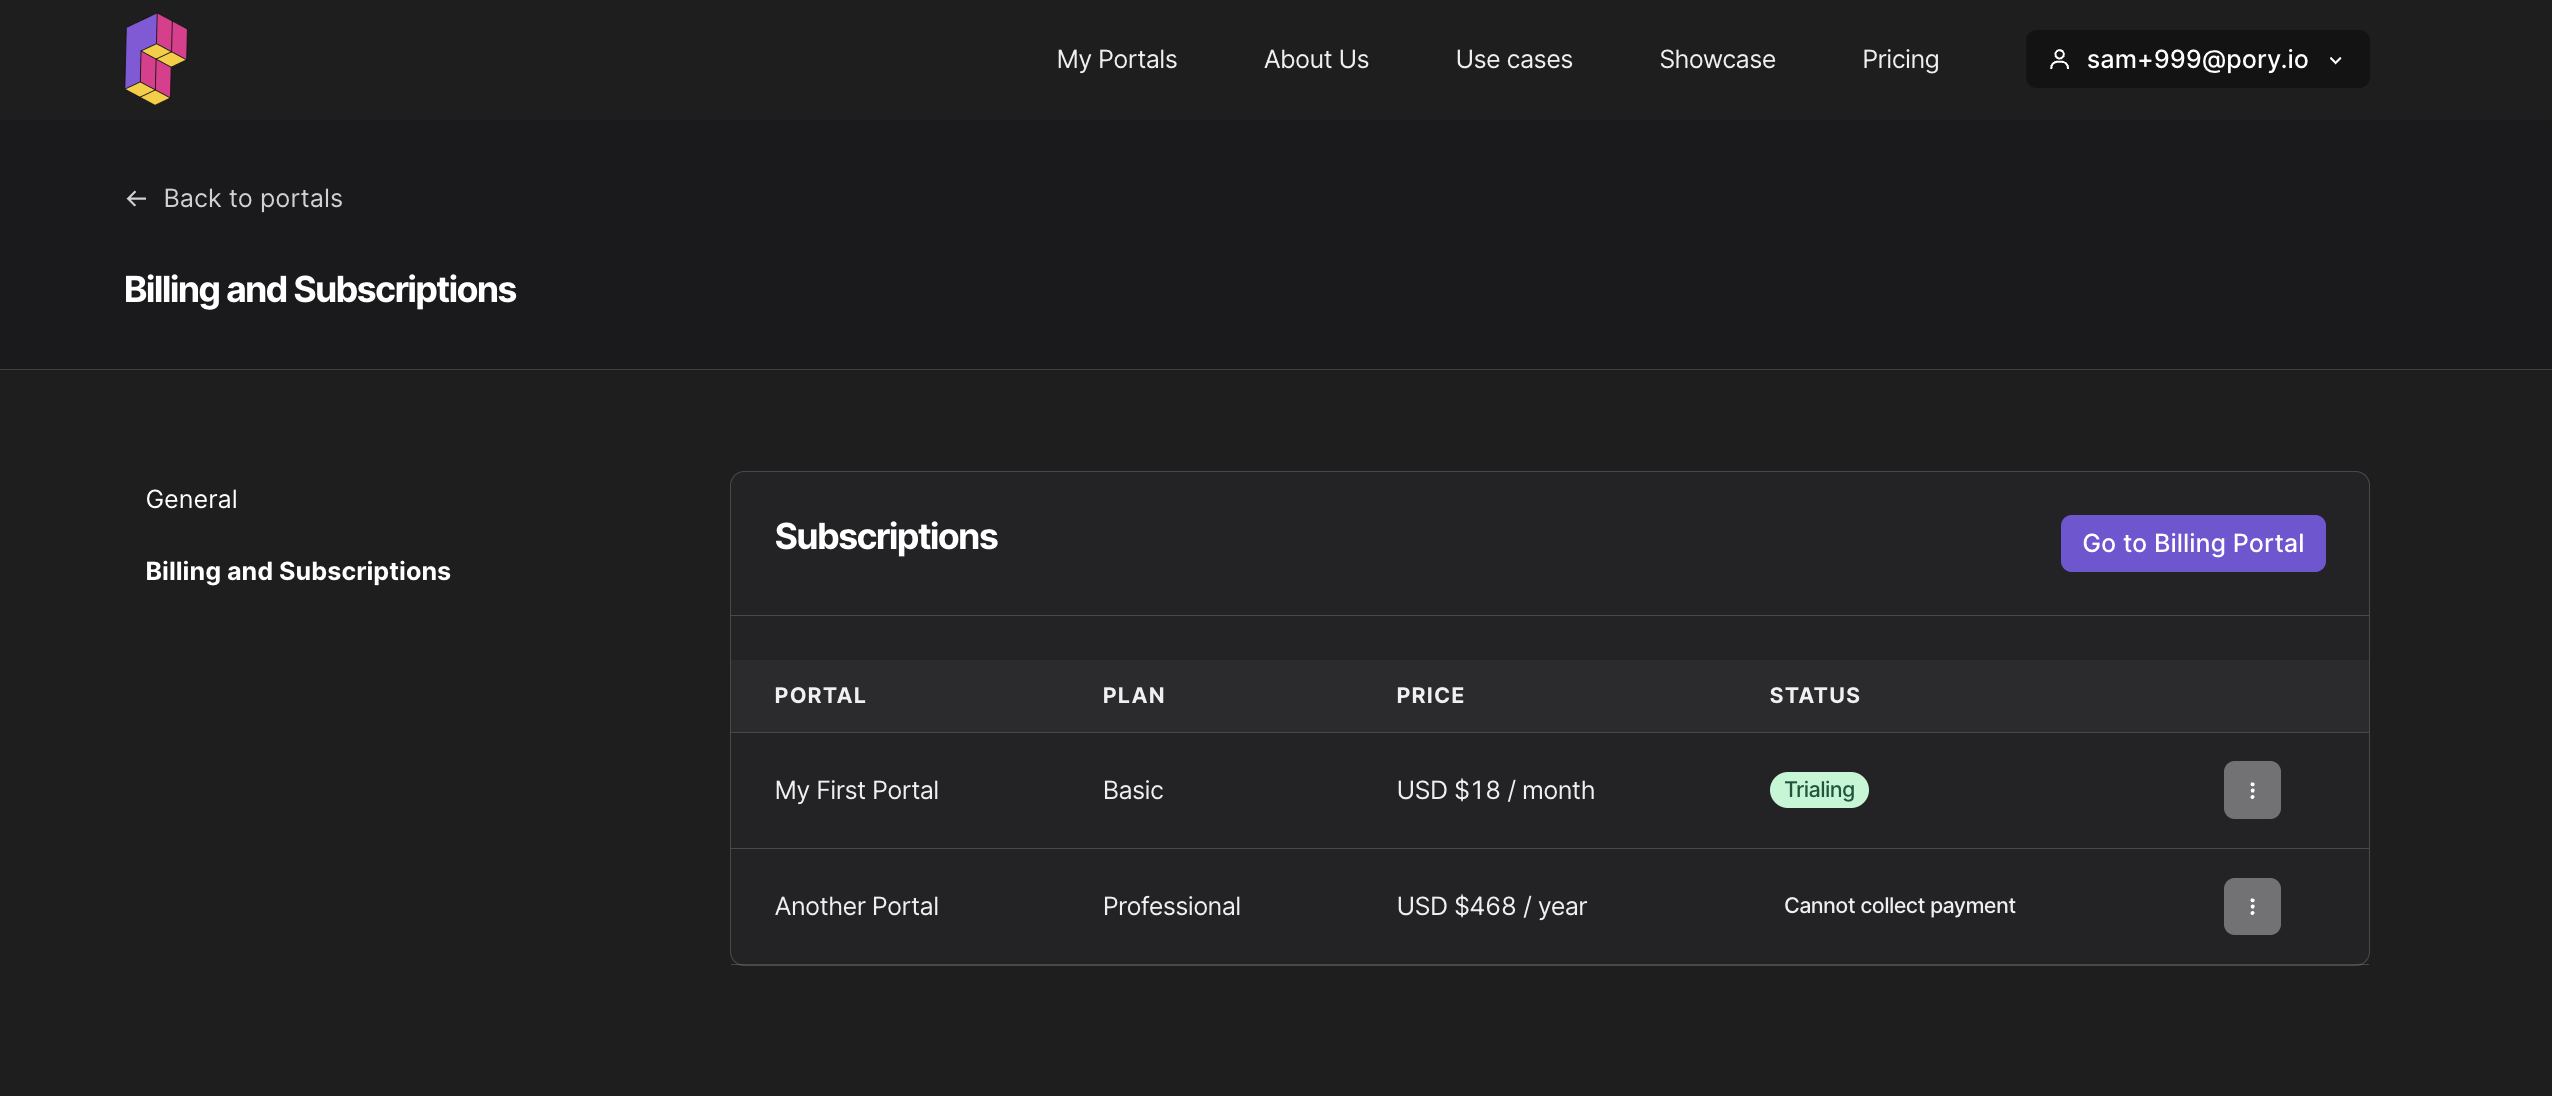 Billing and Subscription page